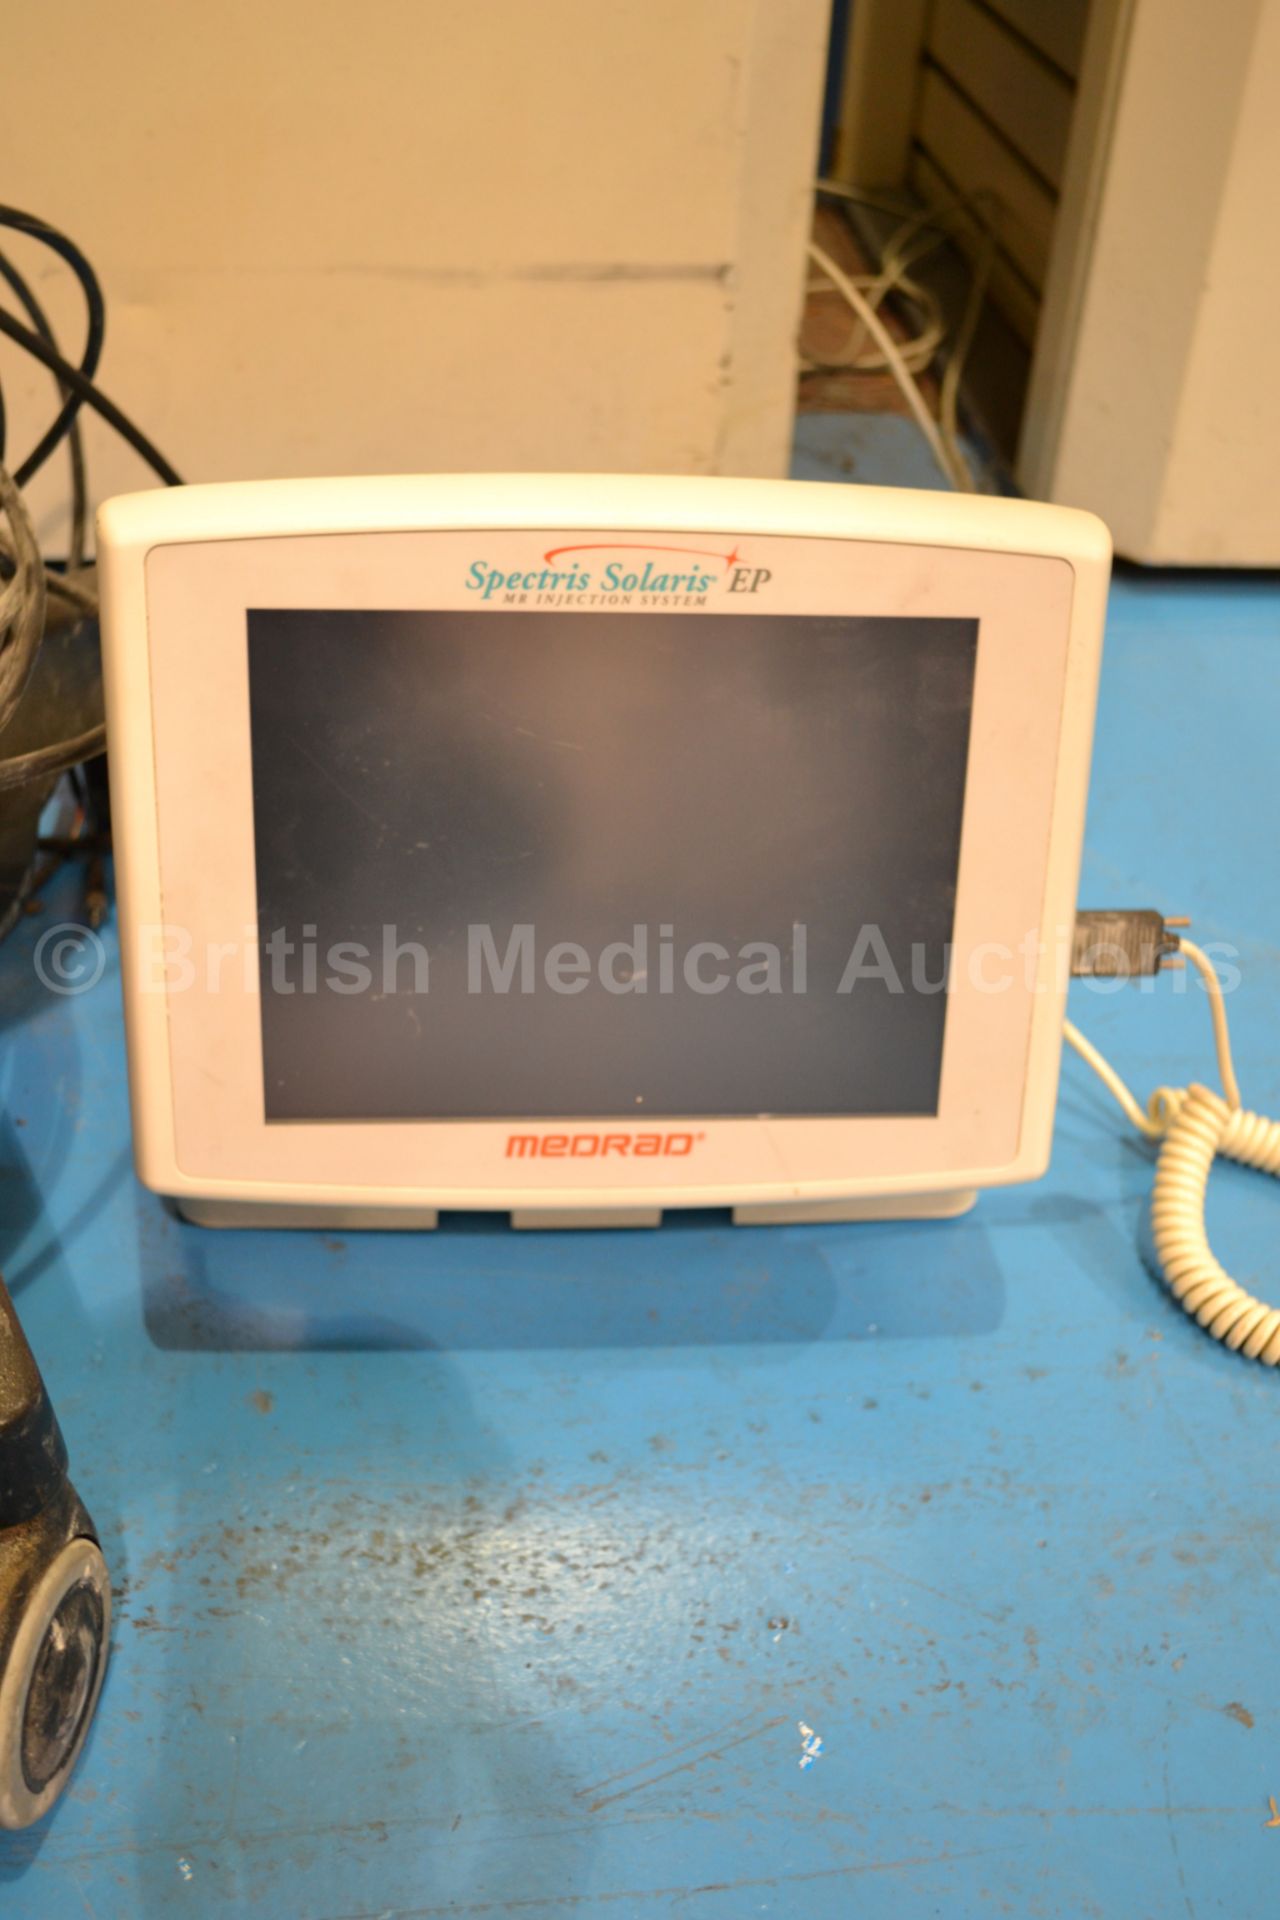 Medrad Spectris Solaris EP MR Injection System wit - Image 7 of 7